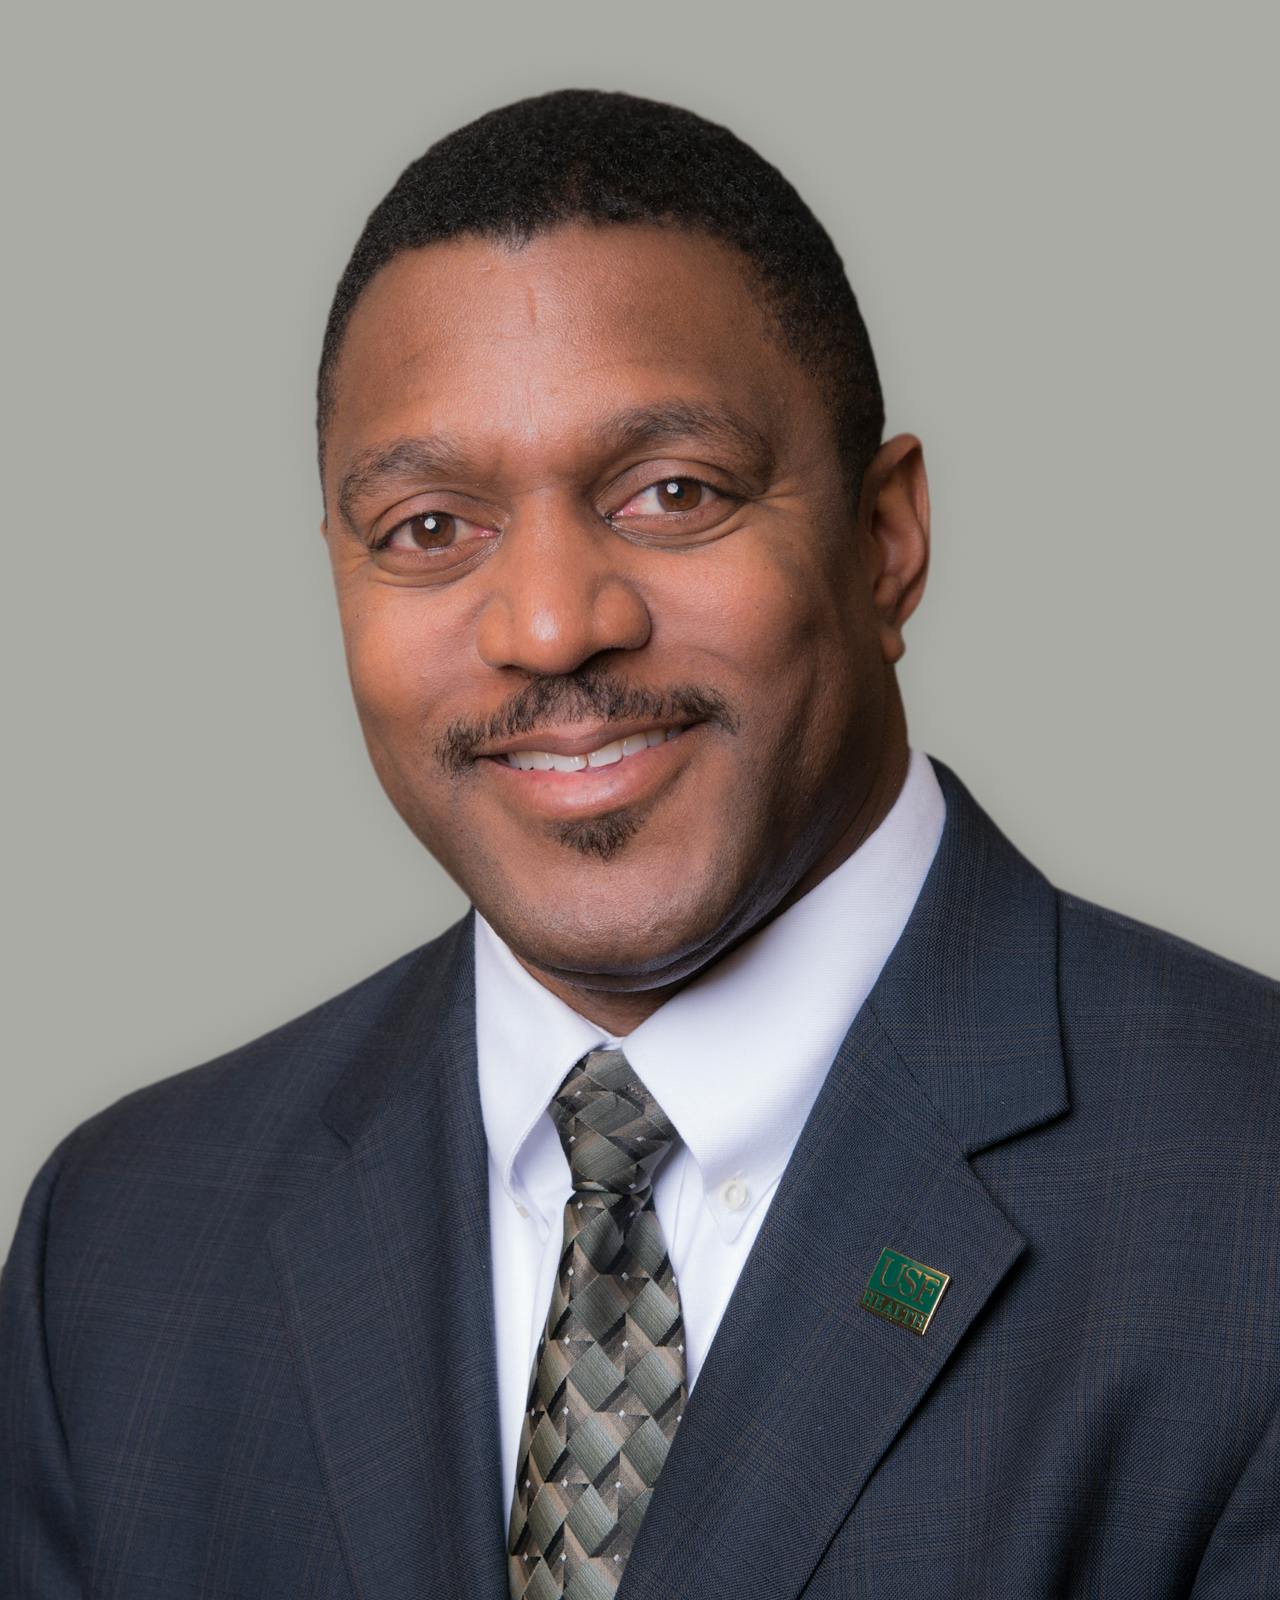 Dr. Kevin B. Sneed